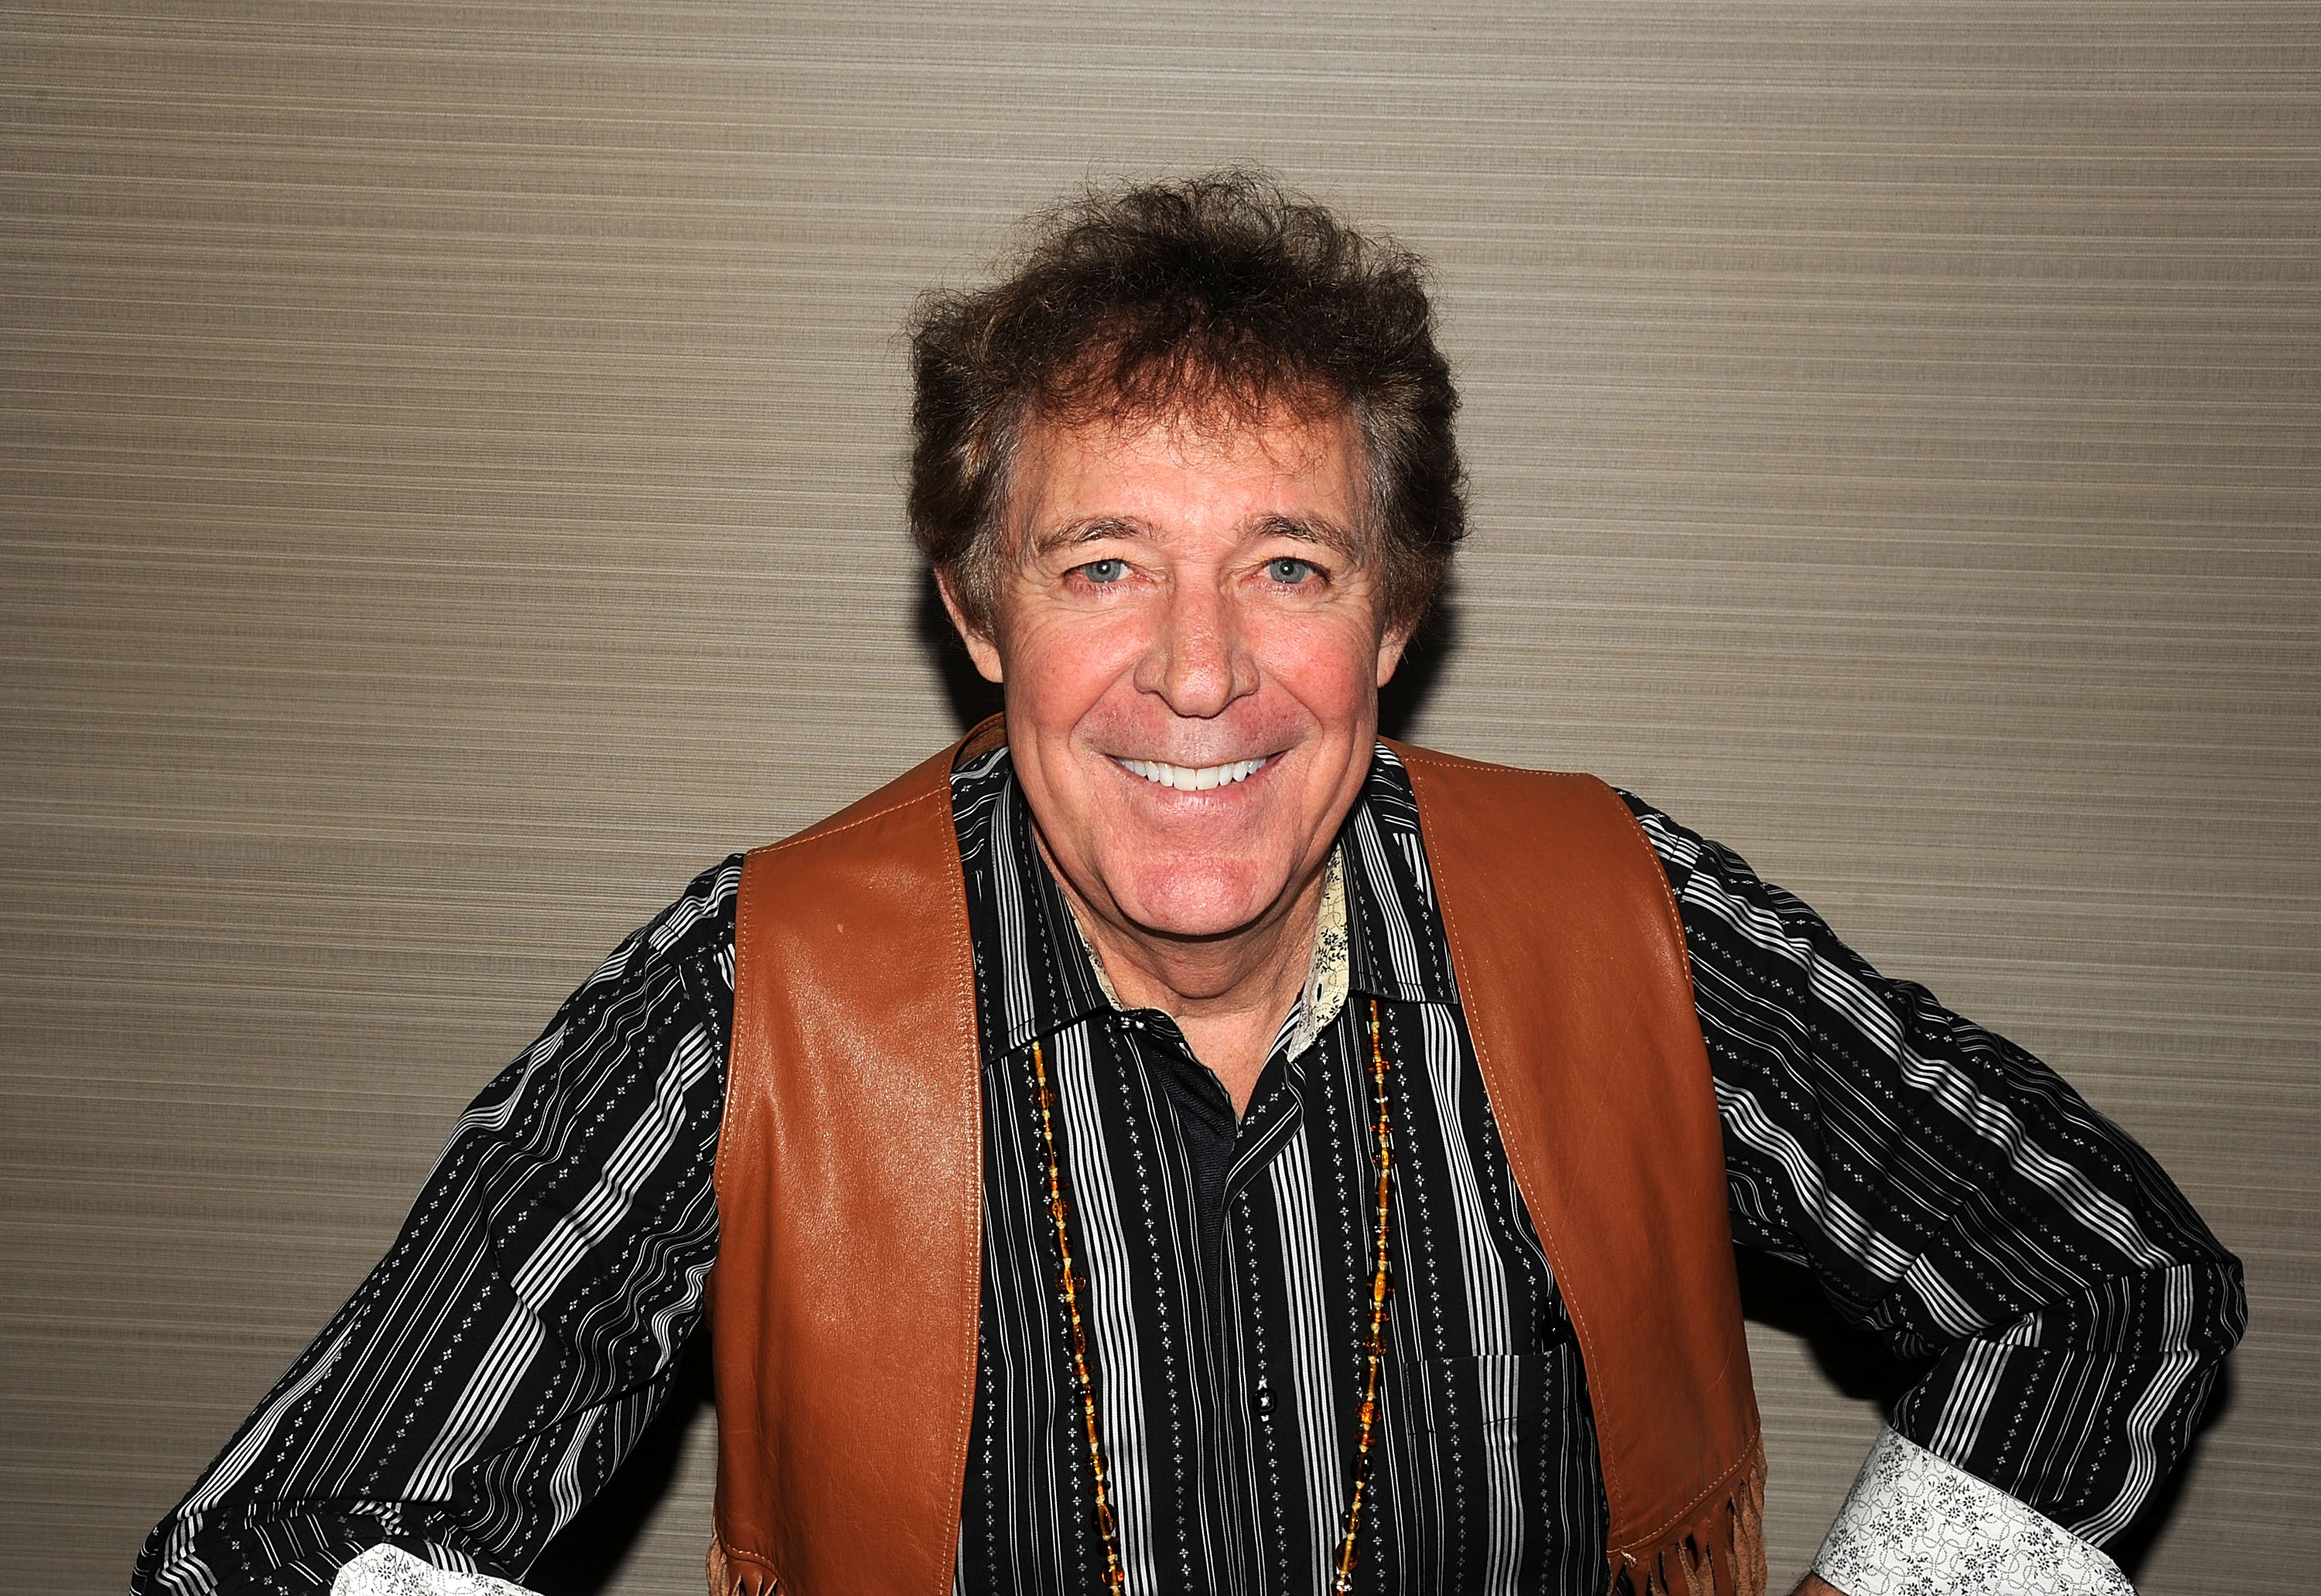 Barry Williams attends Chiller Theater Expo Winter 2017 at Parsippany Hilton on October 28, 2017. | Photo: GettyImages